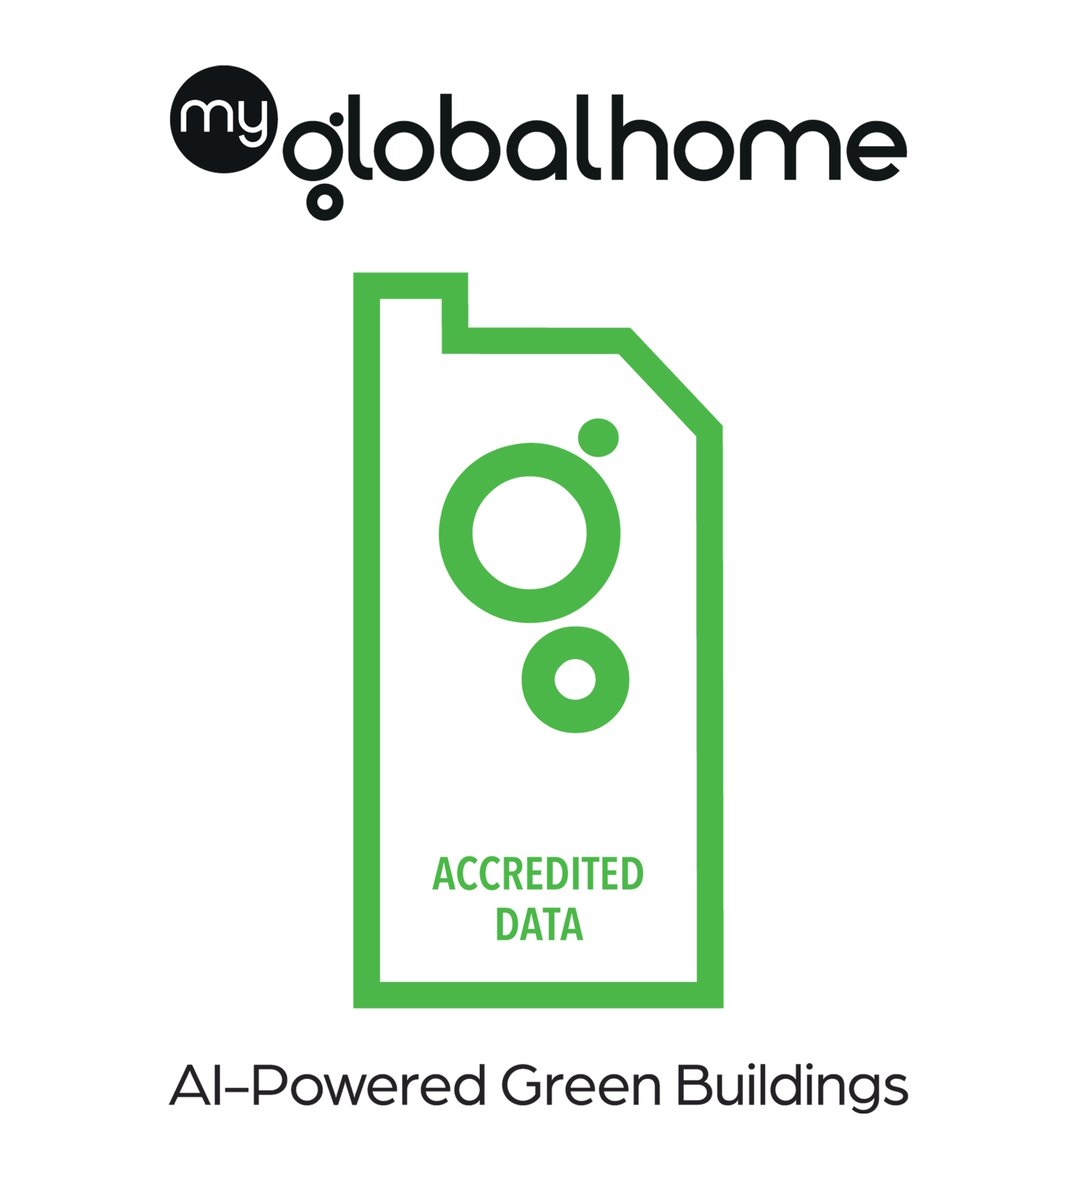 Delighted to announce @MyGlobalHome will be exhibiting at #Futurebuild2023, to showcase how their automotive software & engineering approach can positively impact the future of the construction industry in the UK. Take a stand with Futurebuild 2023 today: bit.ly/3TeoS6K